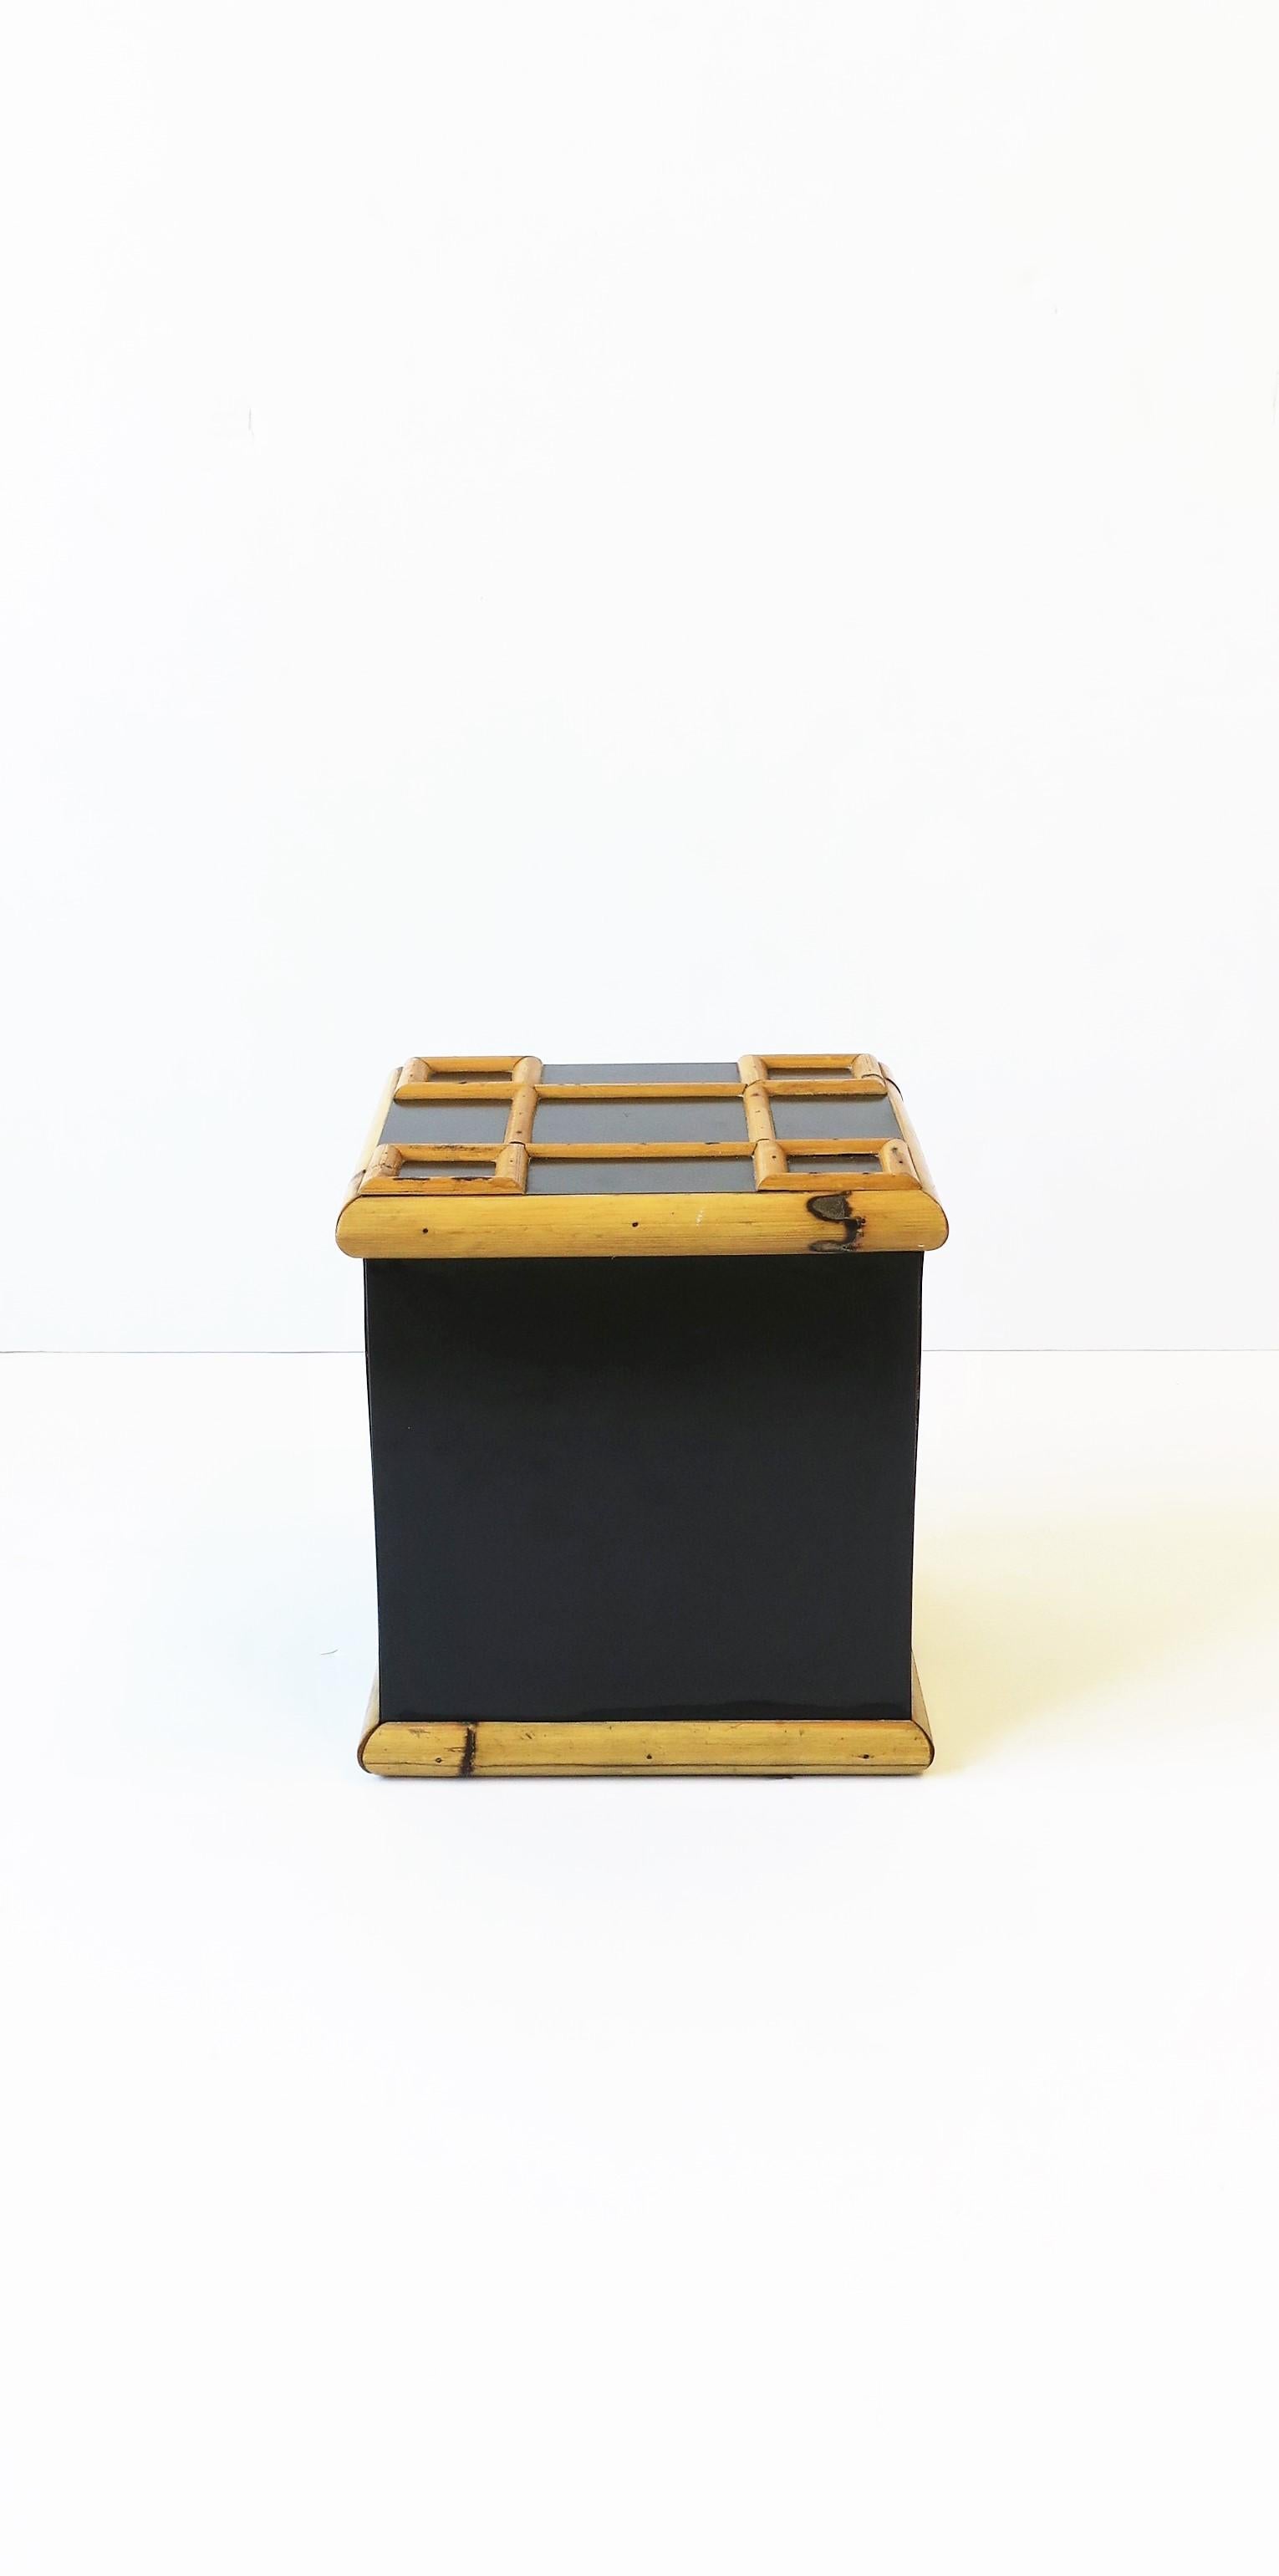 A vintage bamboo and black laminate ice bucket, circa 1960s. Piece is square with a lattice bamboo design on top/lid and a bamboo edged base. A great entertaining piece for any bar, pool house, entertaining area, etc. 

Dimensions: 8.75